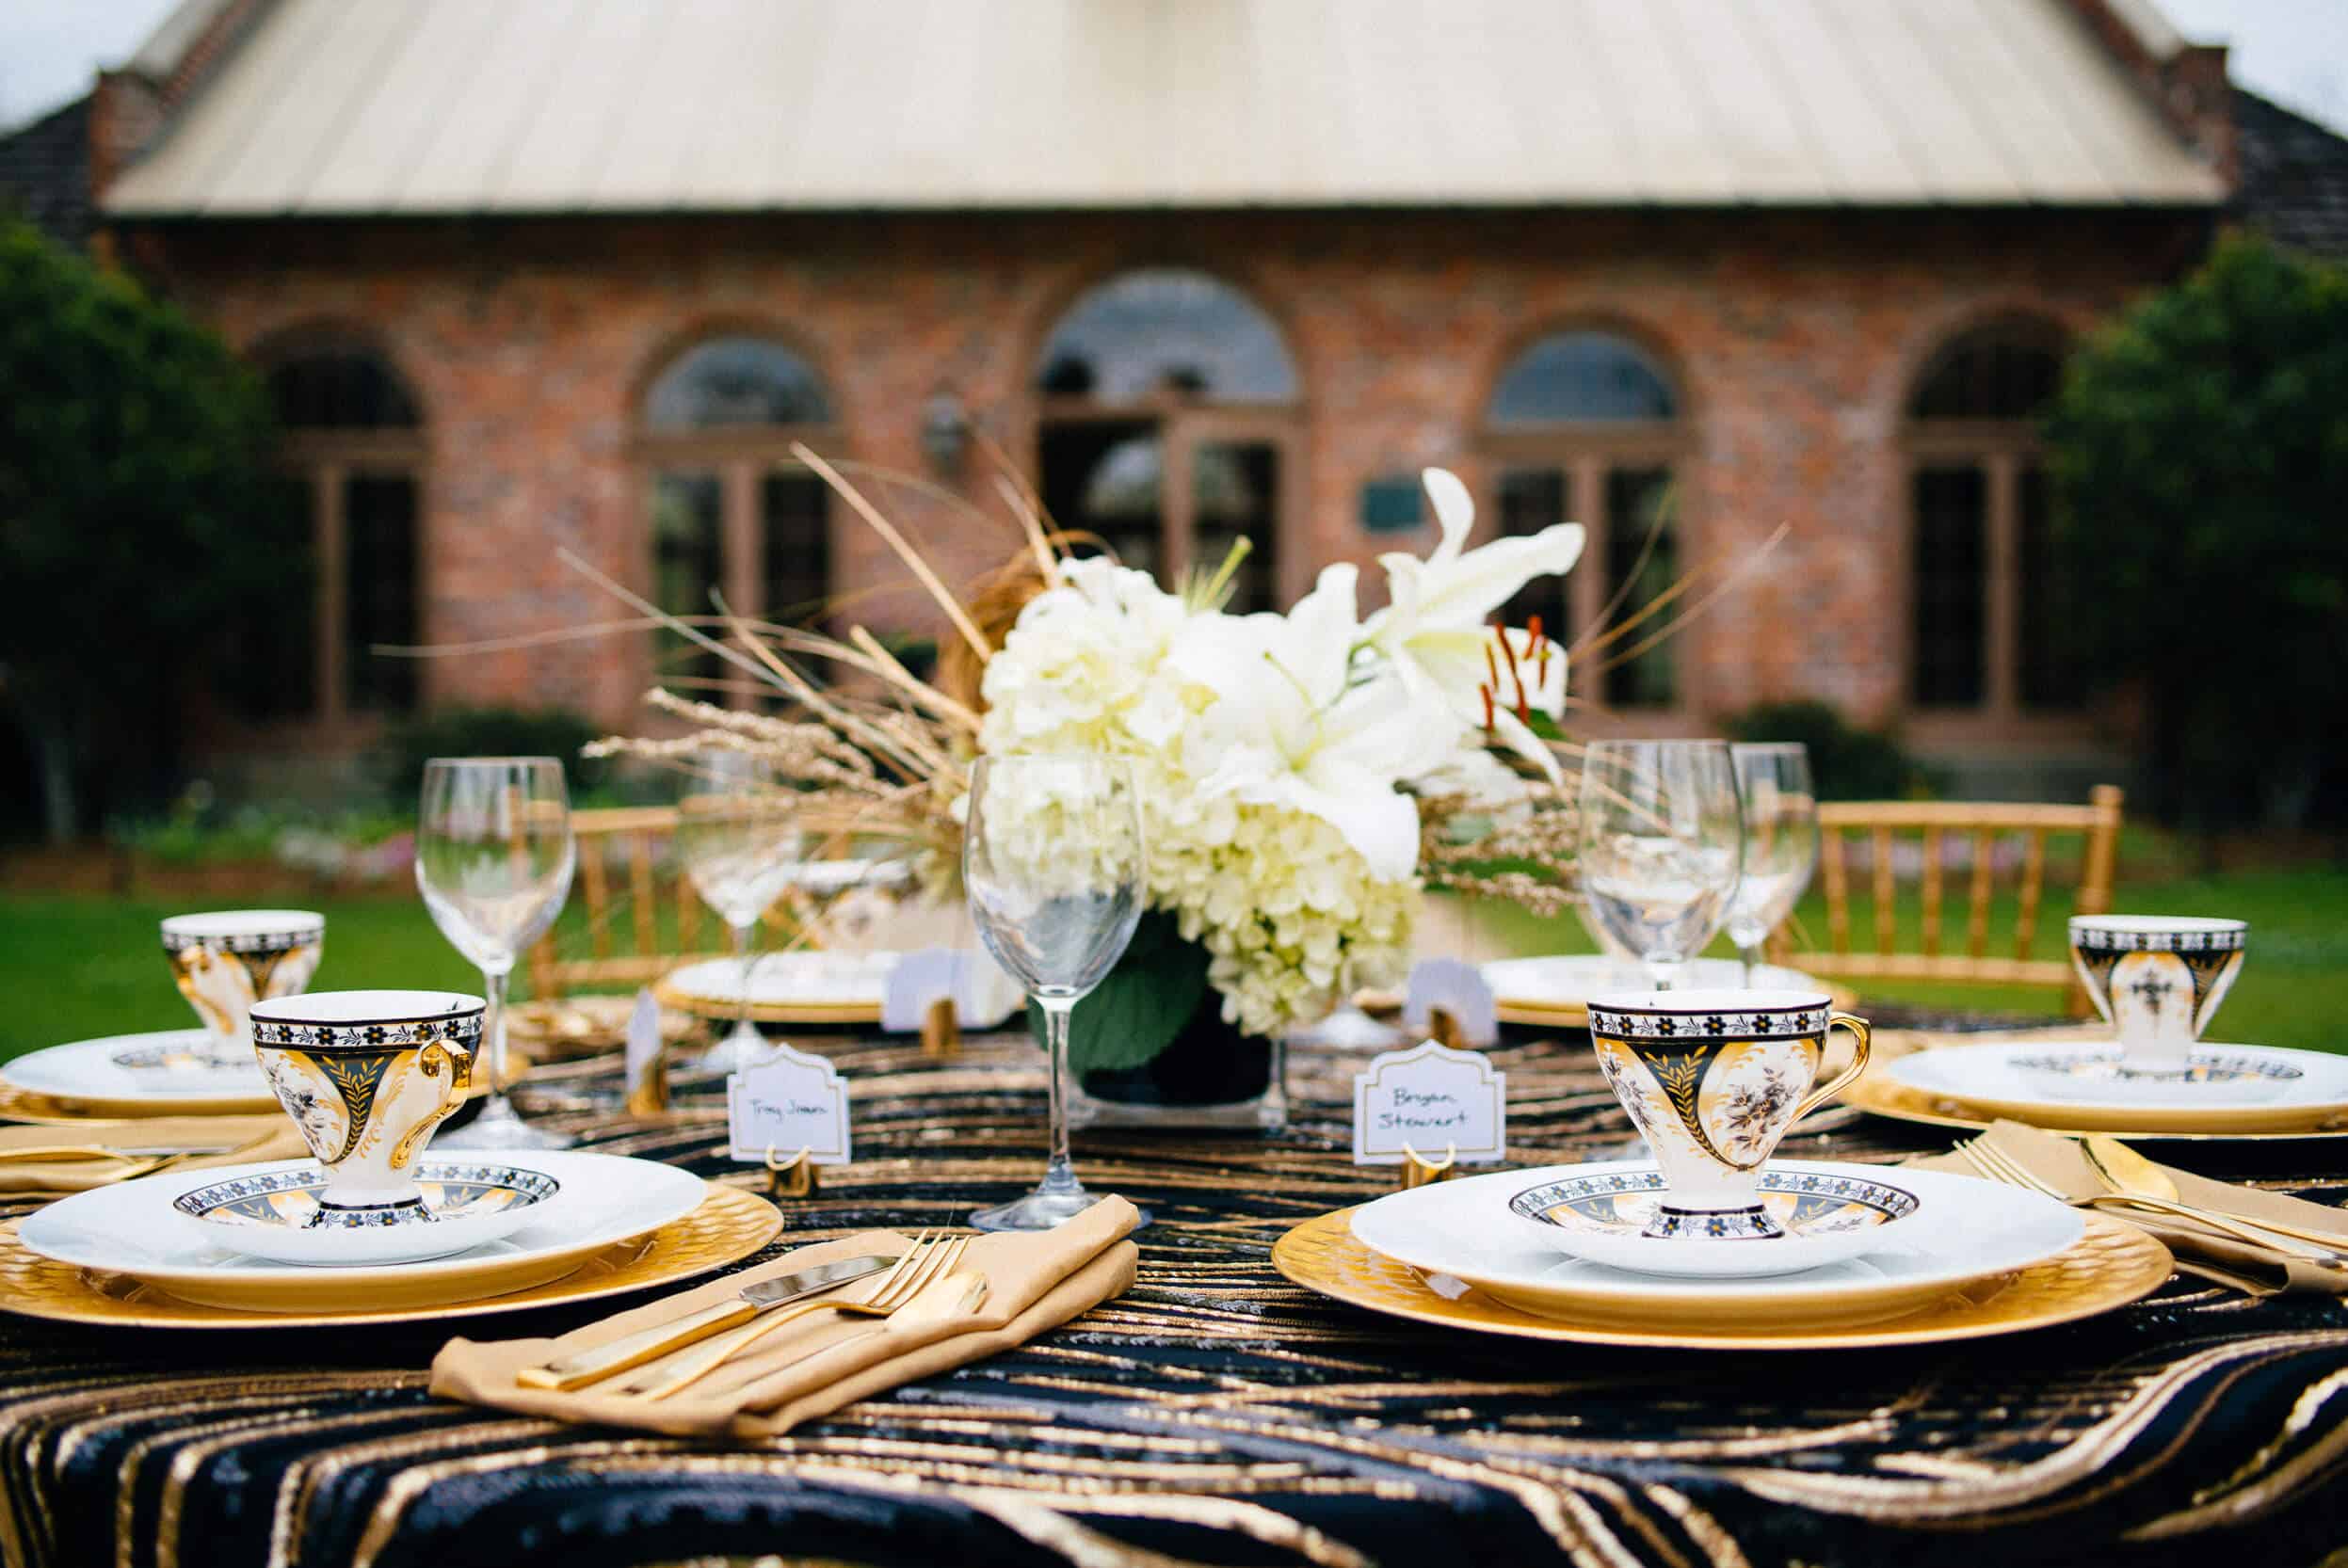 A table set with plates and silverware, glasses and flowers.